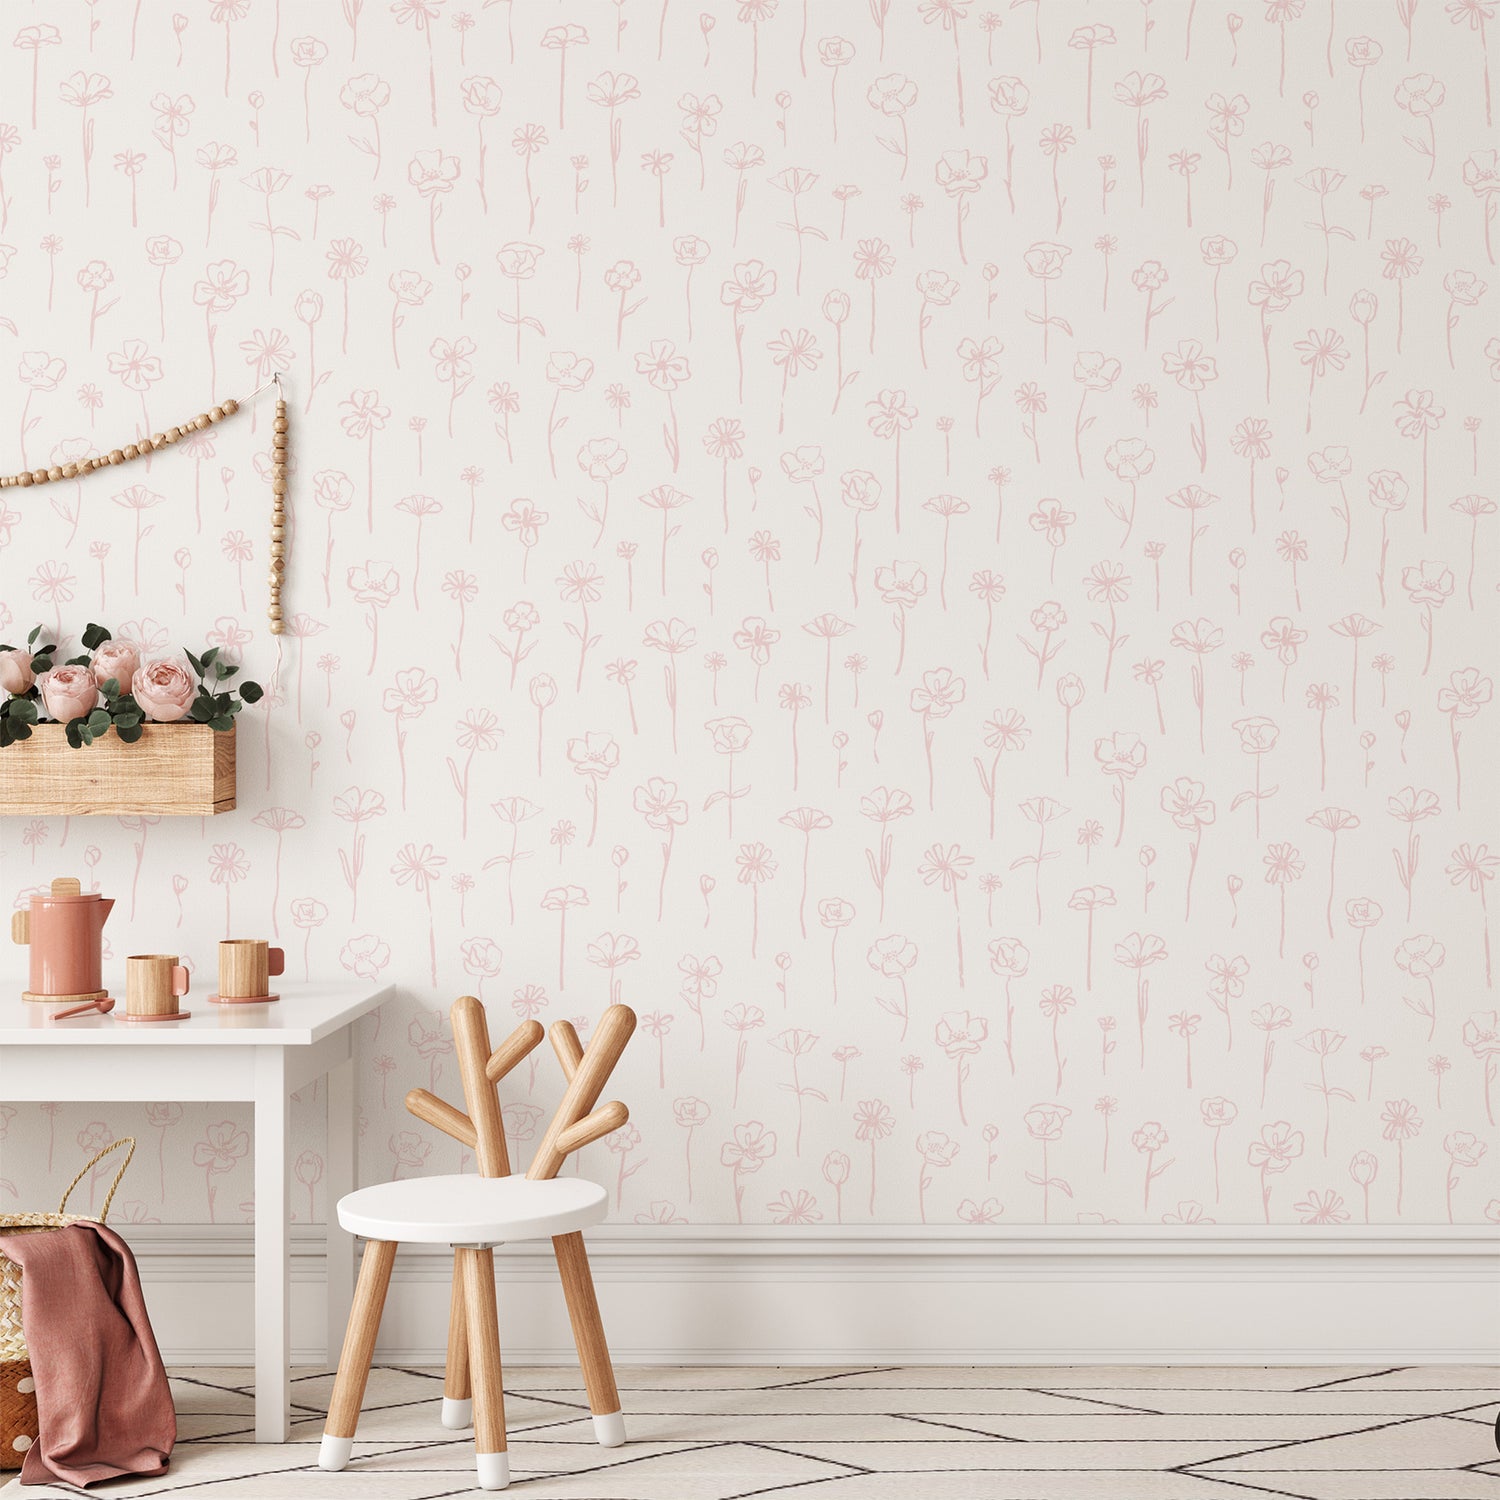 Nursery and Playroom featuring Lila's Floral Stems- a feminine dainty floral pattern